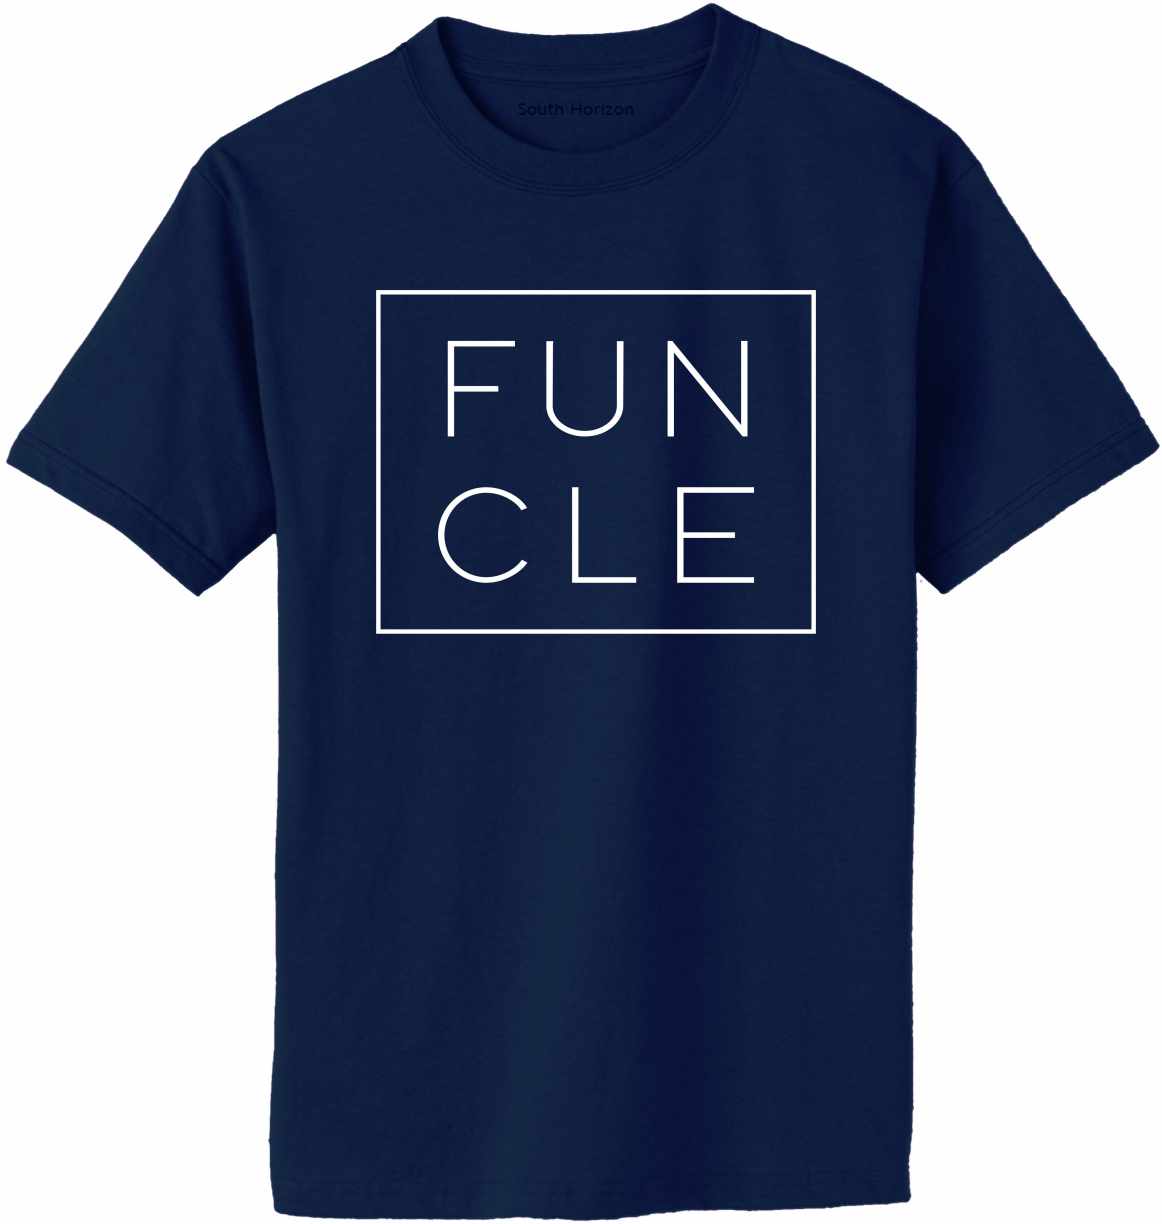 FUNCLE - Box on Adult T-Shirt